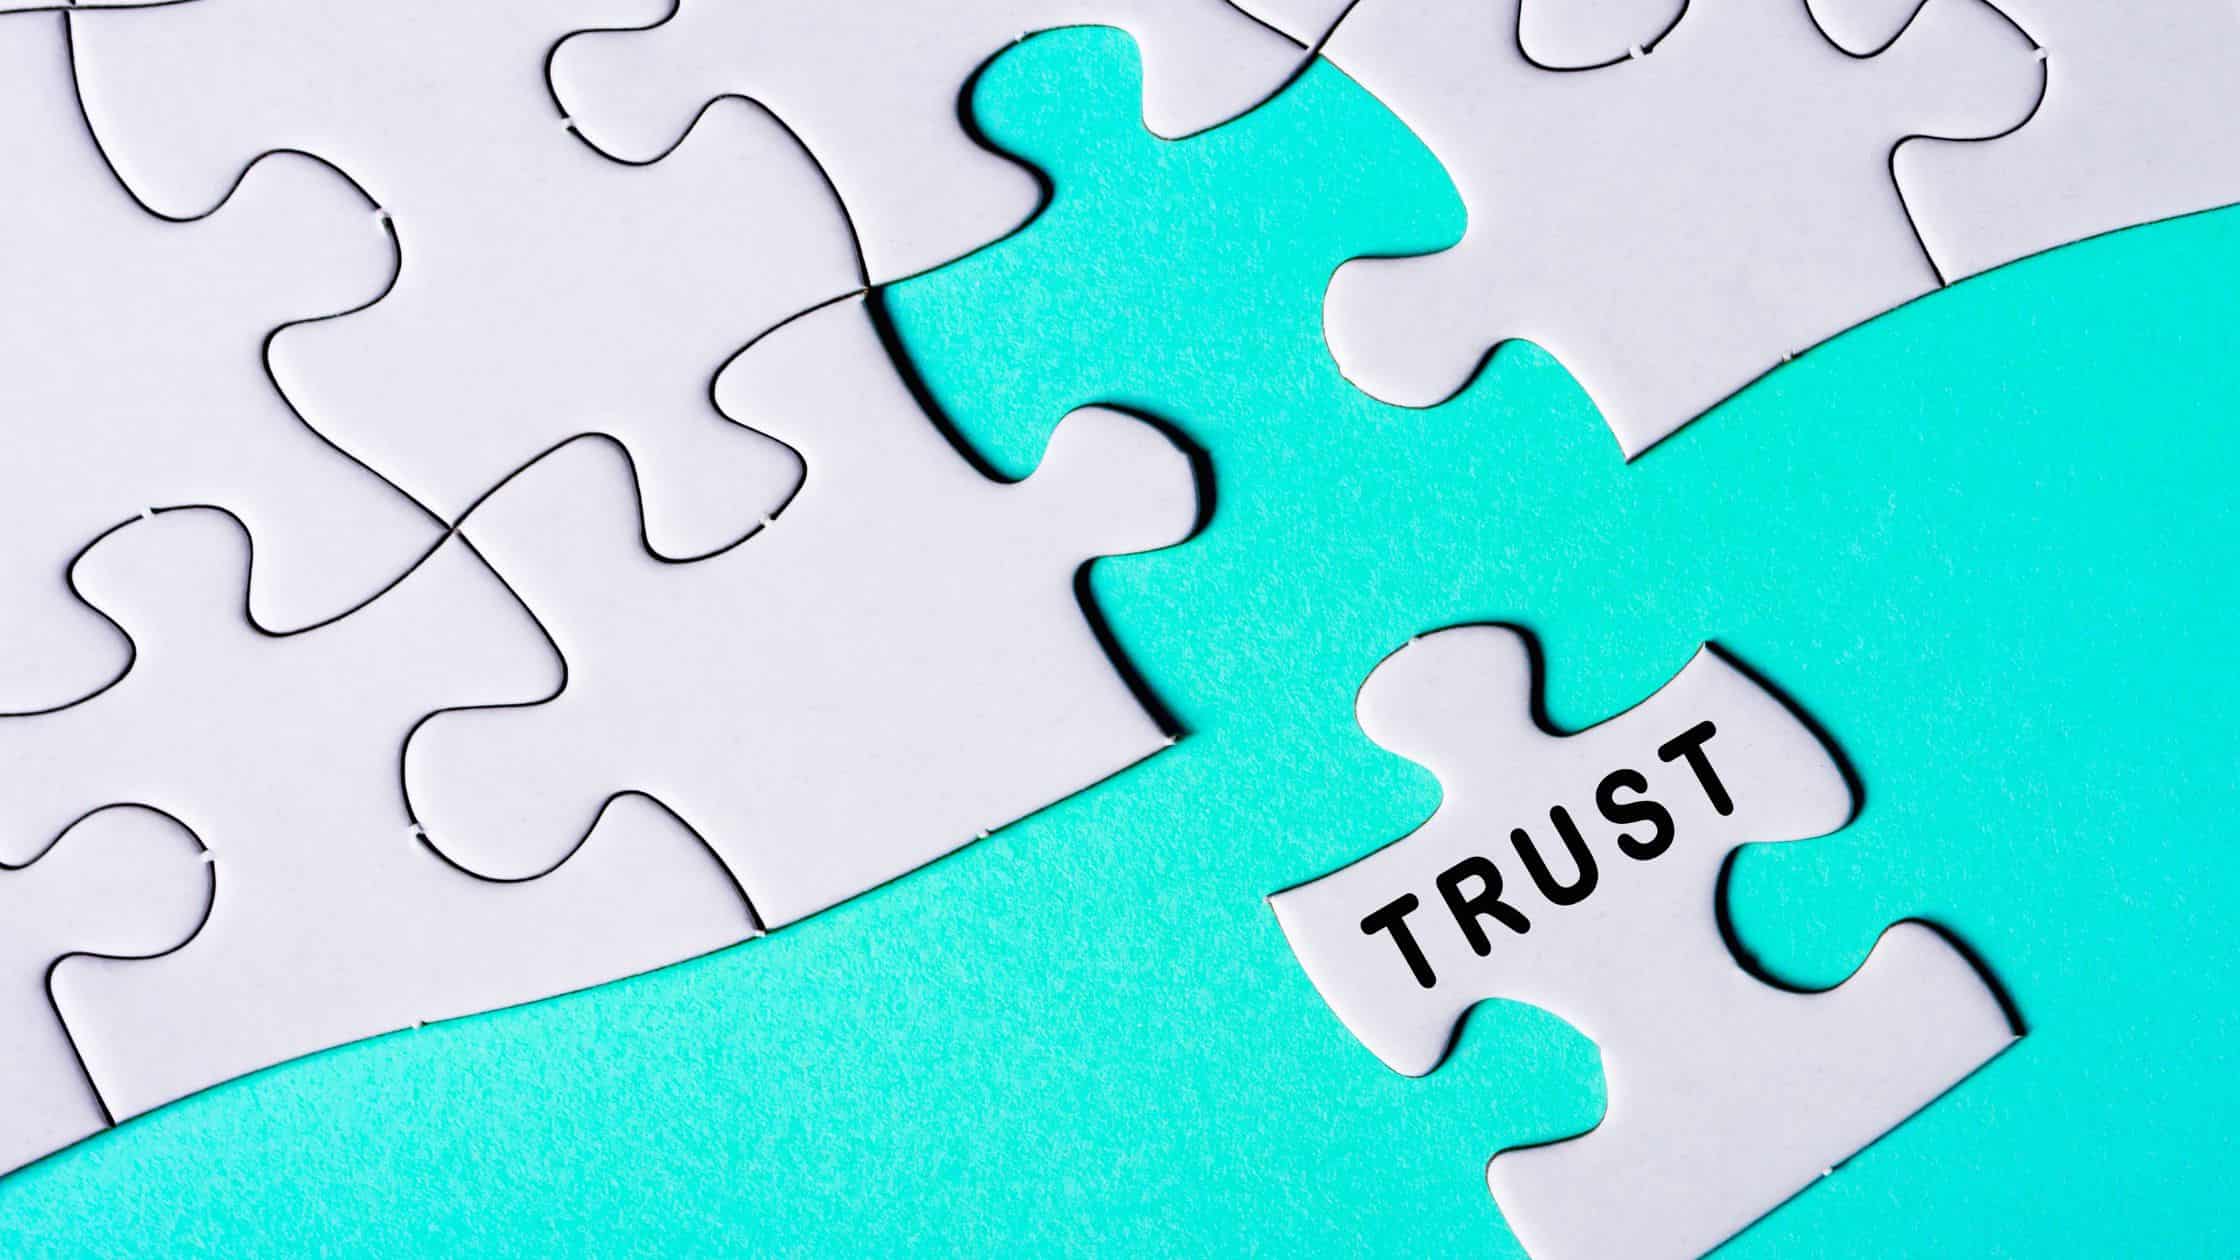 Discover how establishing trust can be a game-changer for leaders. From the key elements of trust to actionable insights, get ready to inspire and be inspired.